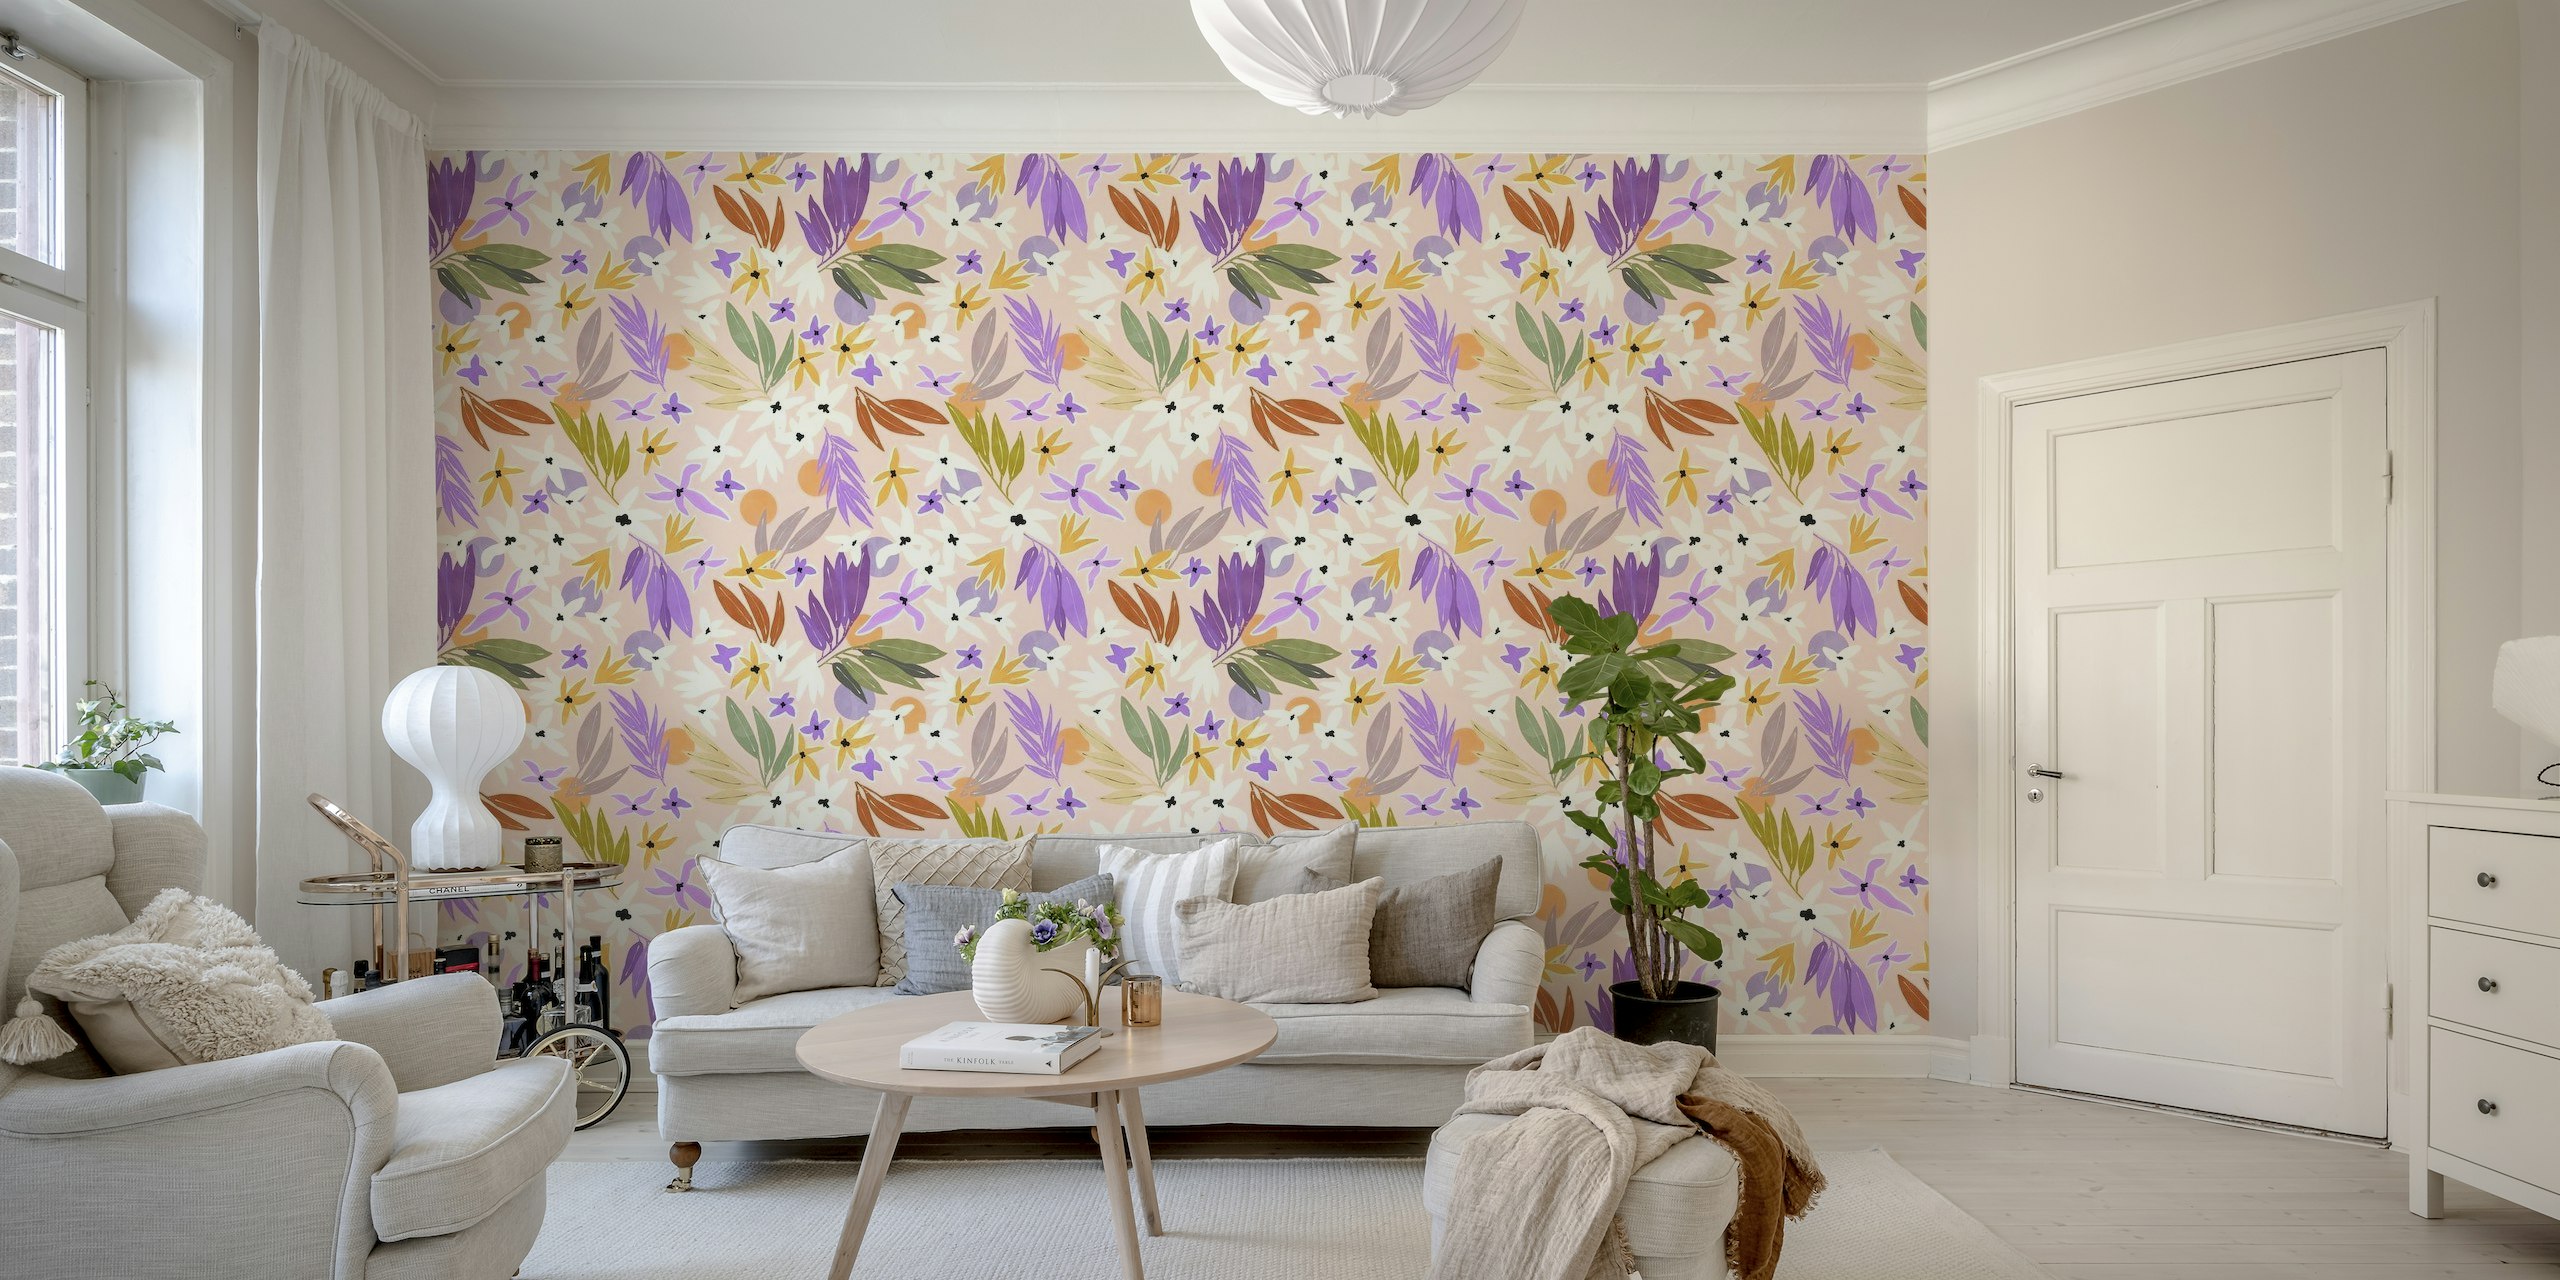 Floral wall mural with colorful, hand-painted style flowers on a warm background